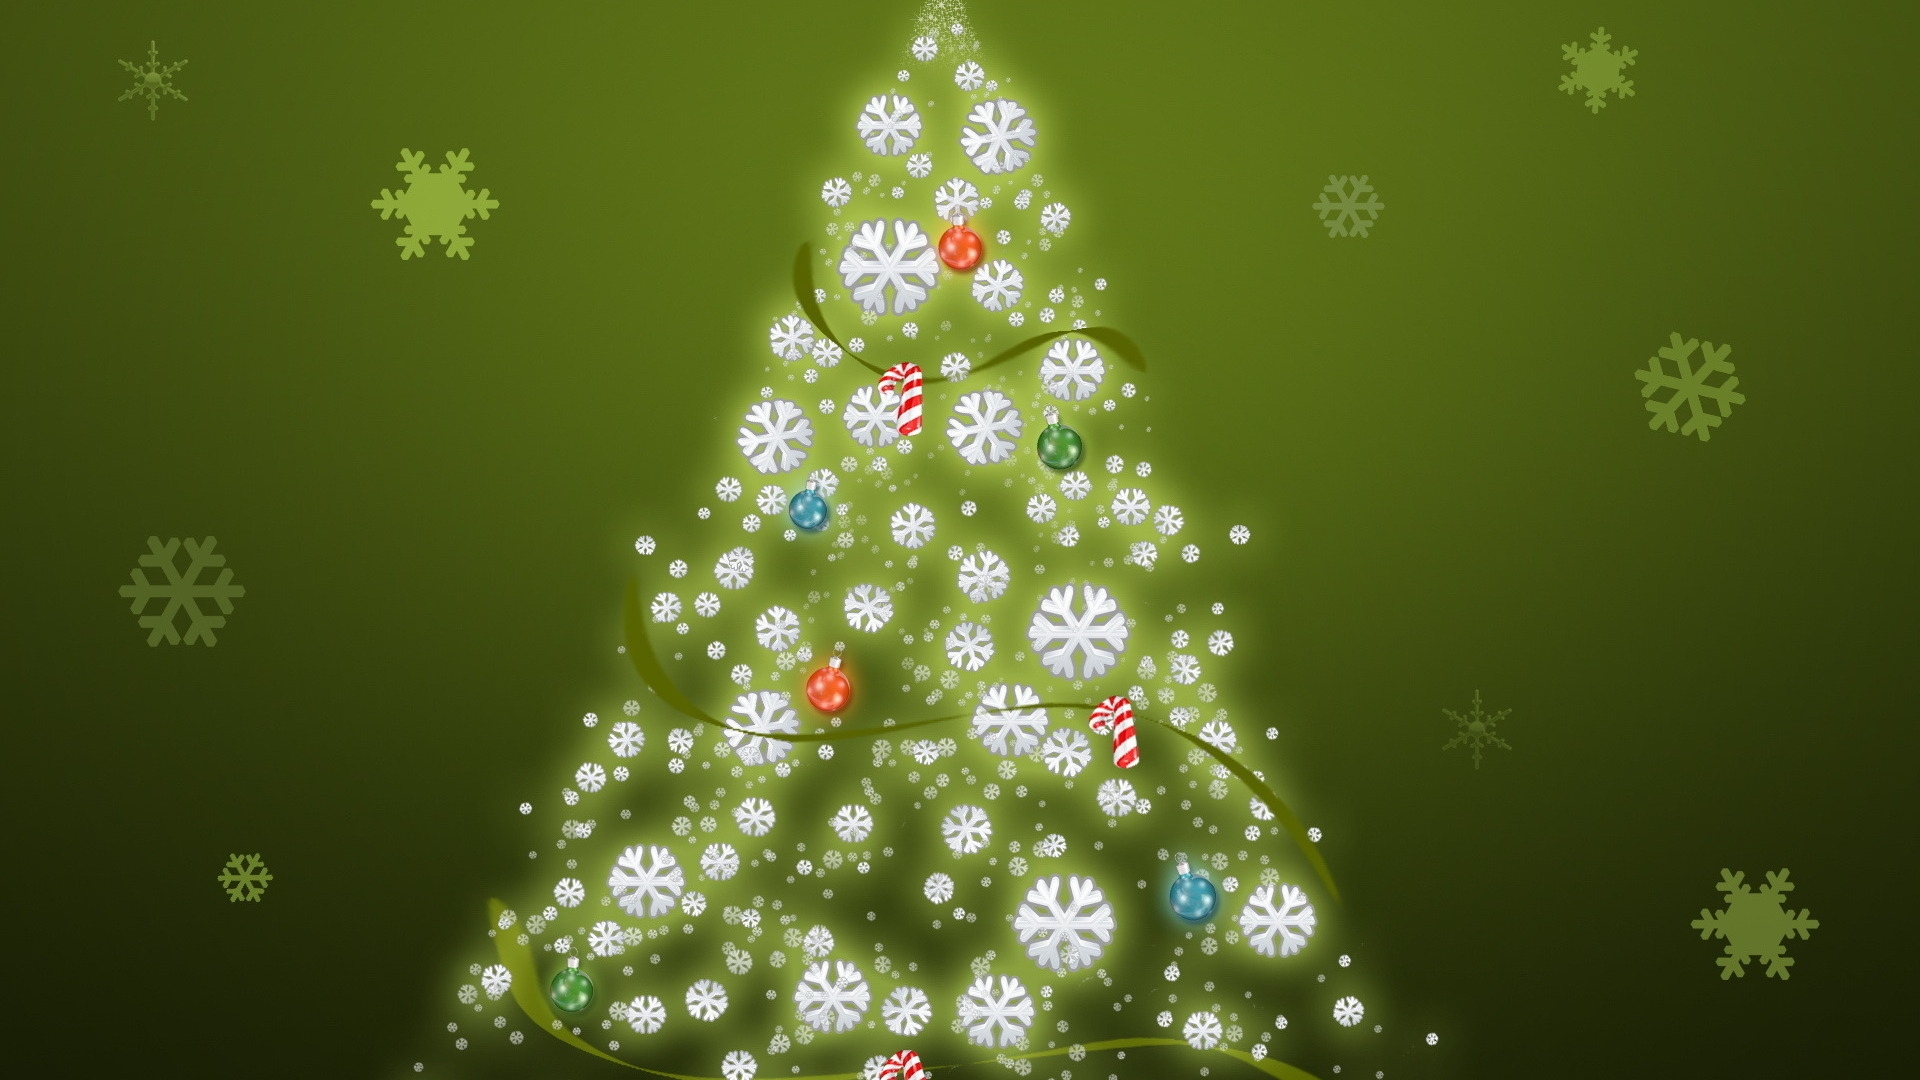 Its Just a Christmas Tree for 1920 x 1080 HDTV 1080p resolution